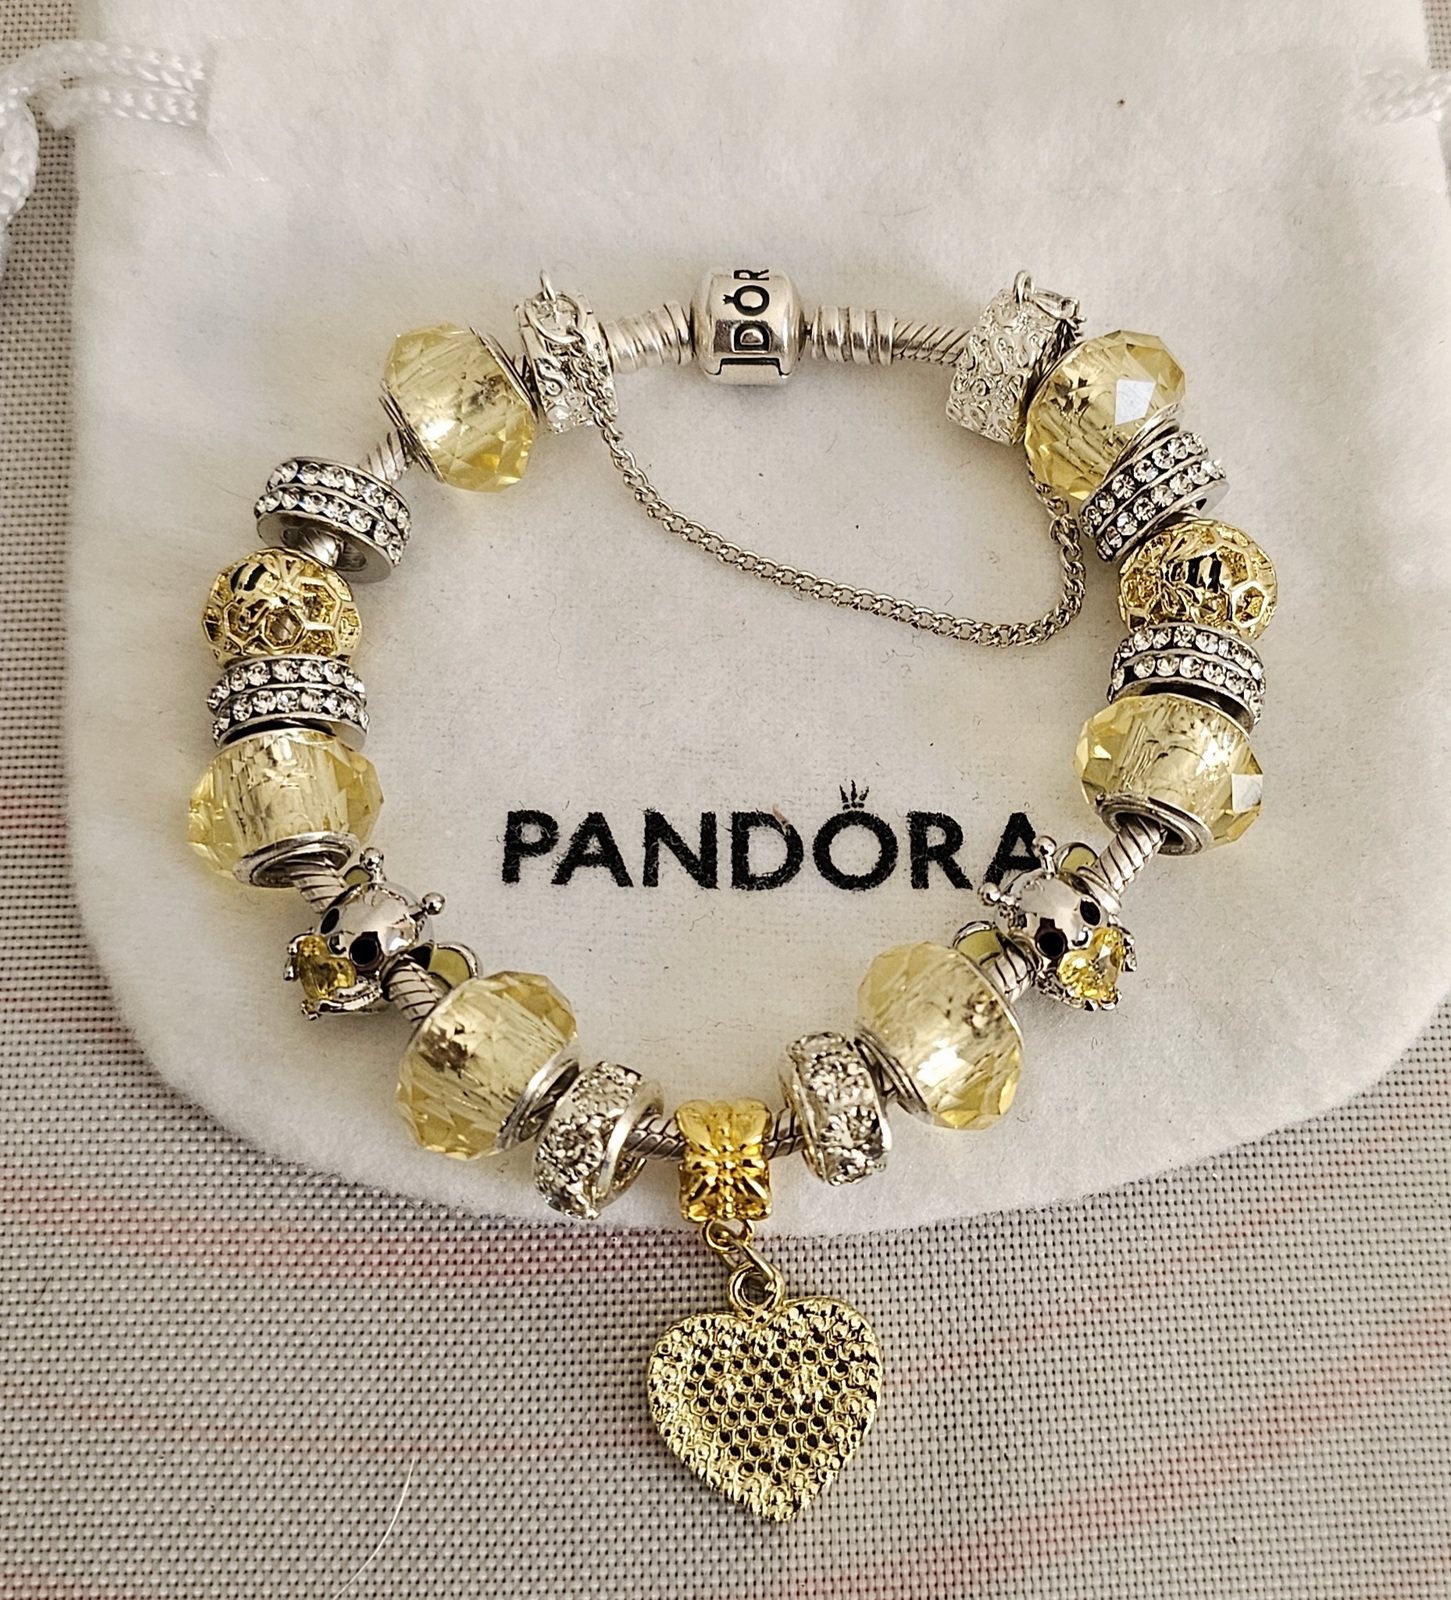 Busy as a Bee - Authentic Pandora Bracelet with receipt - $145.00